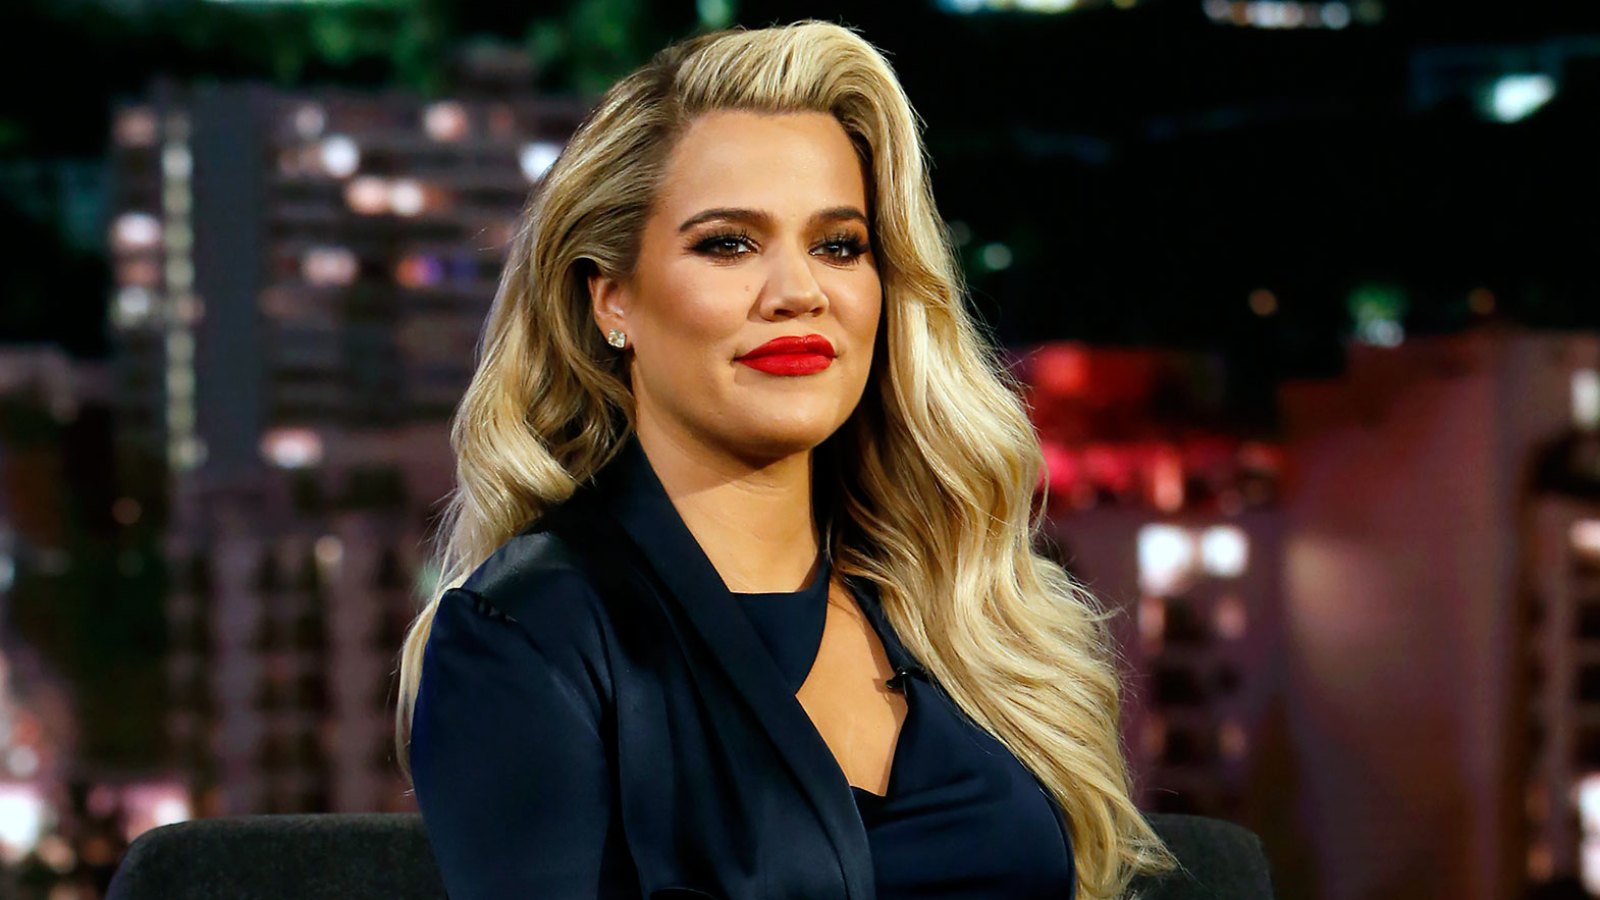 Khloe Kardashian Posts About Deciding 'You Want Better for Yourself